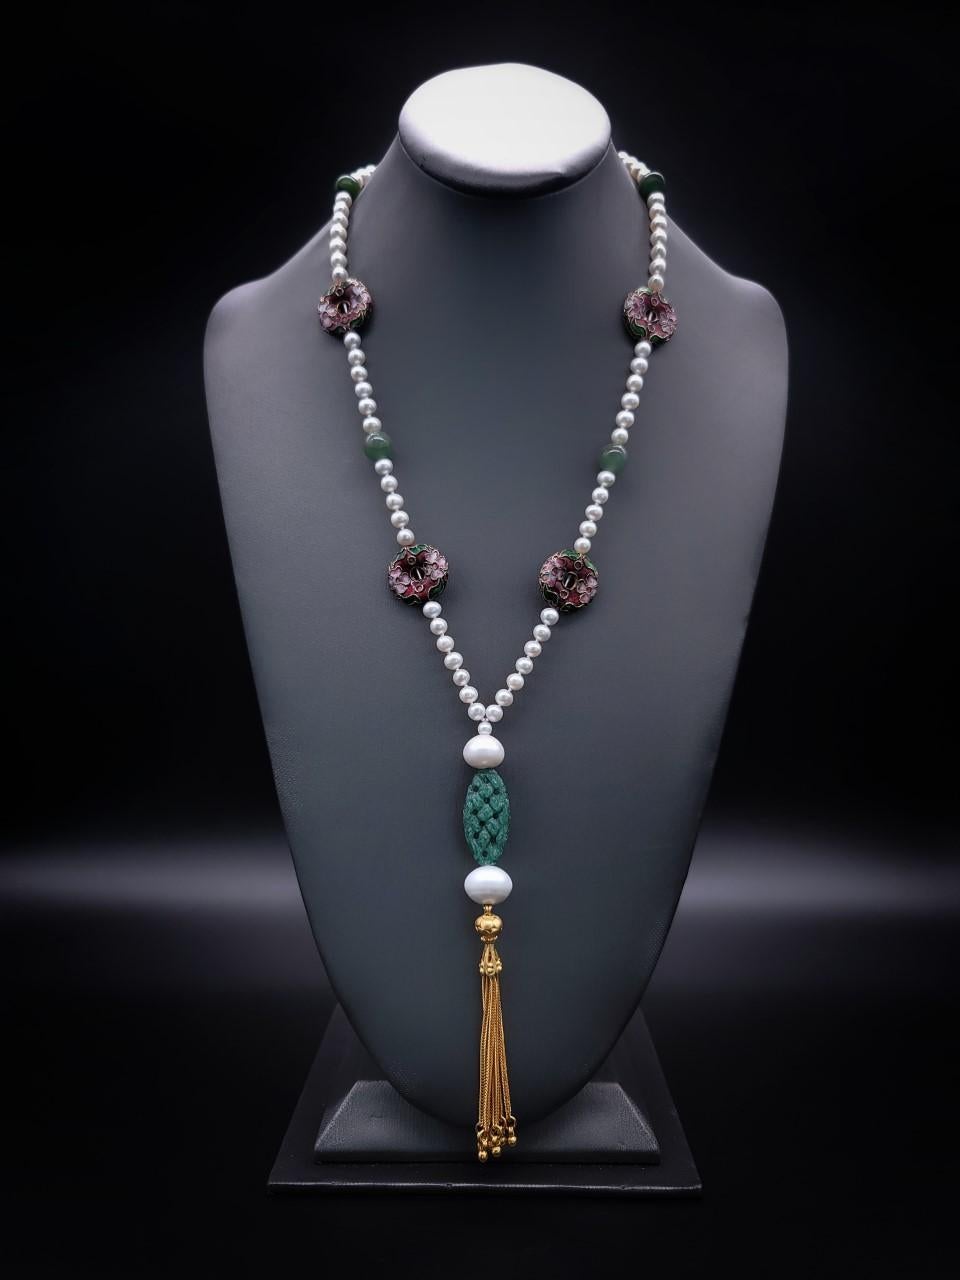 A.Jeschel Long freshwater Pearl necklace with richly colored Cloisonne.